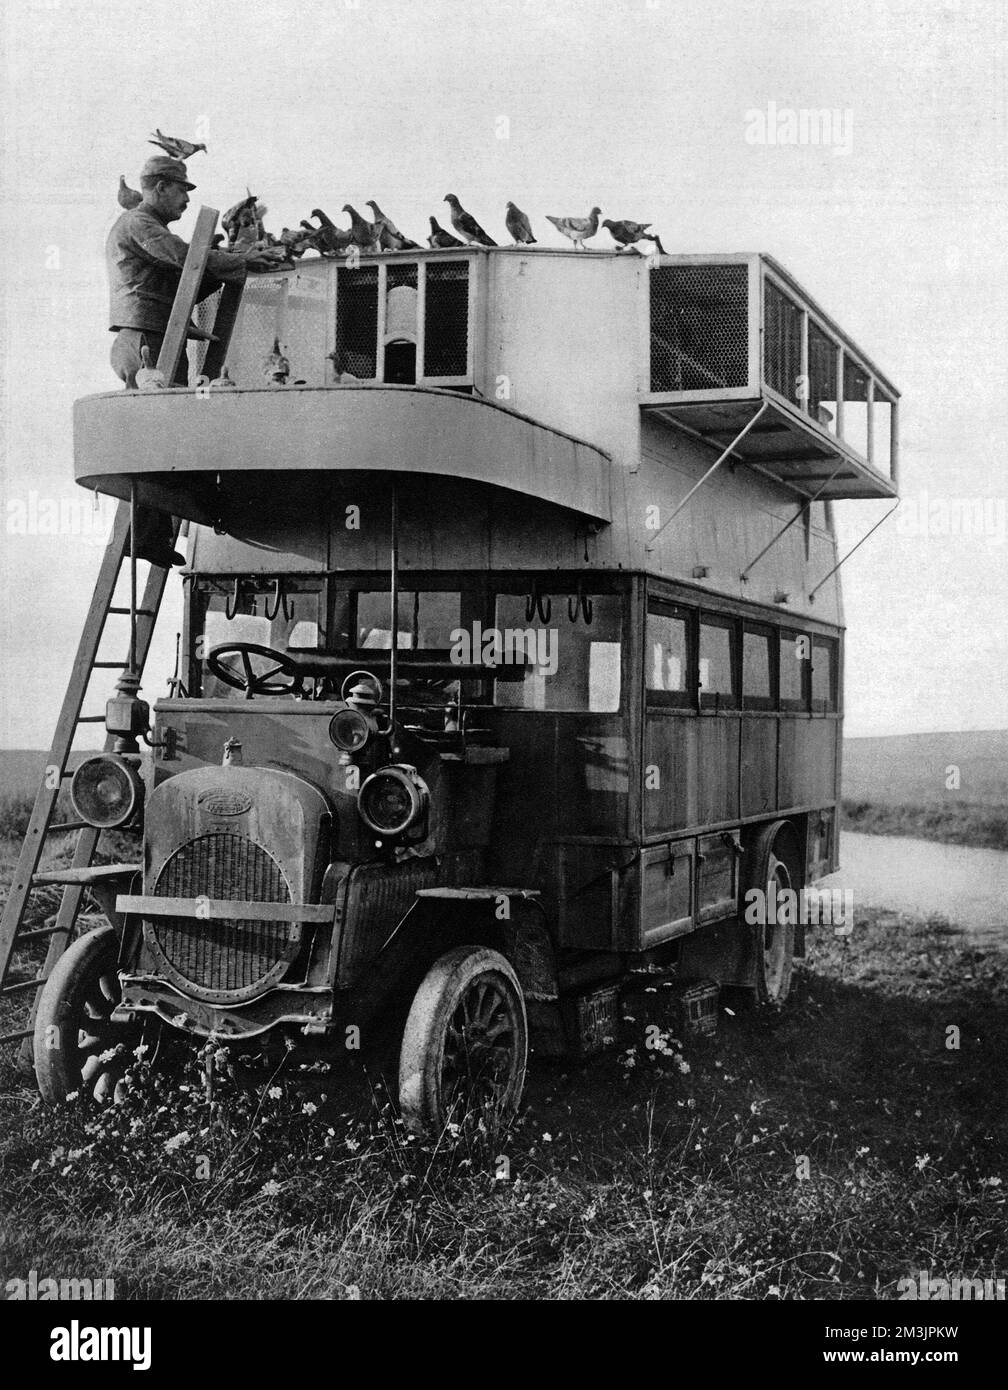 A motor bus converted into a home, or cote, for French carrier pigeons.  Pigeons, along with dogs, proved to be a vital method of communication during battles.  Around 100,000 pigeons were used during World War I with 95% of messages successfully reaching their intended recipient.  1915 Stock Photo